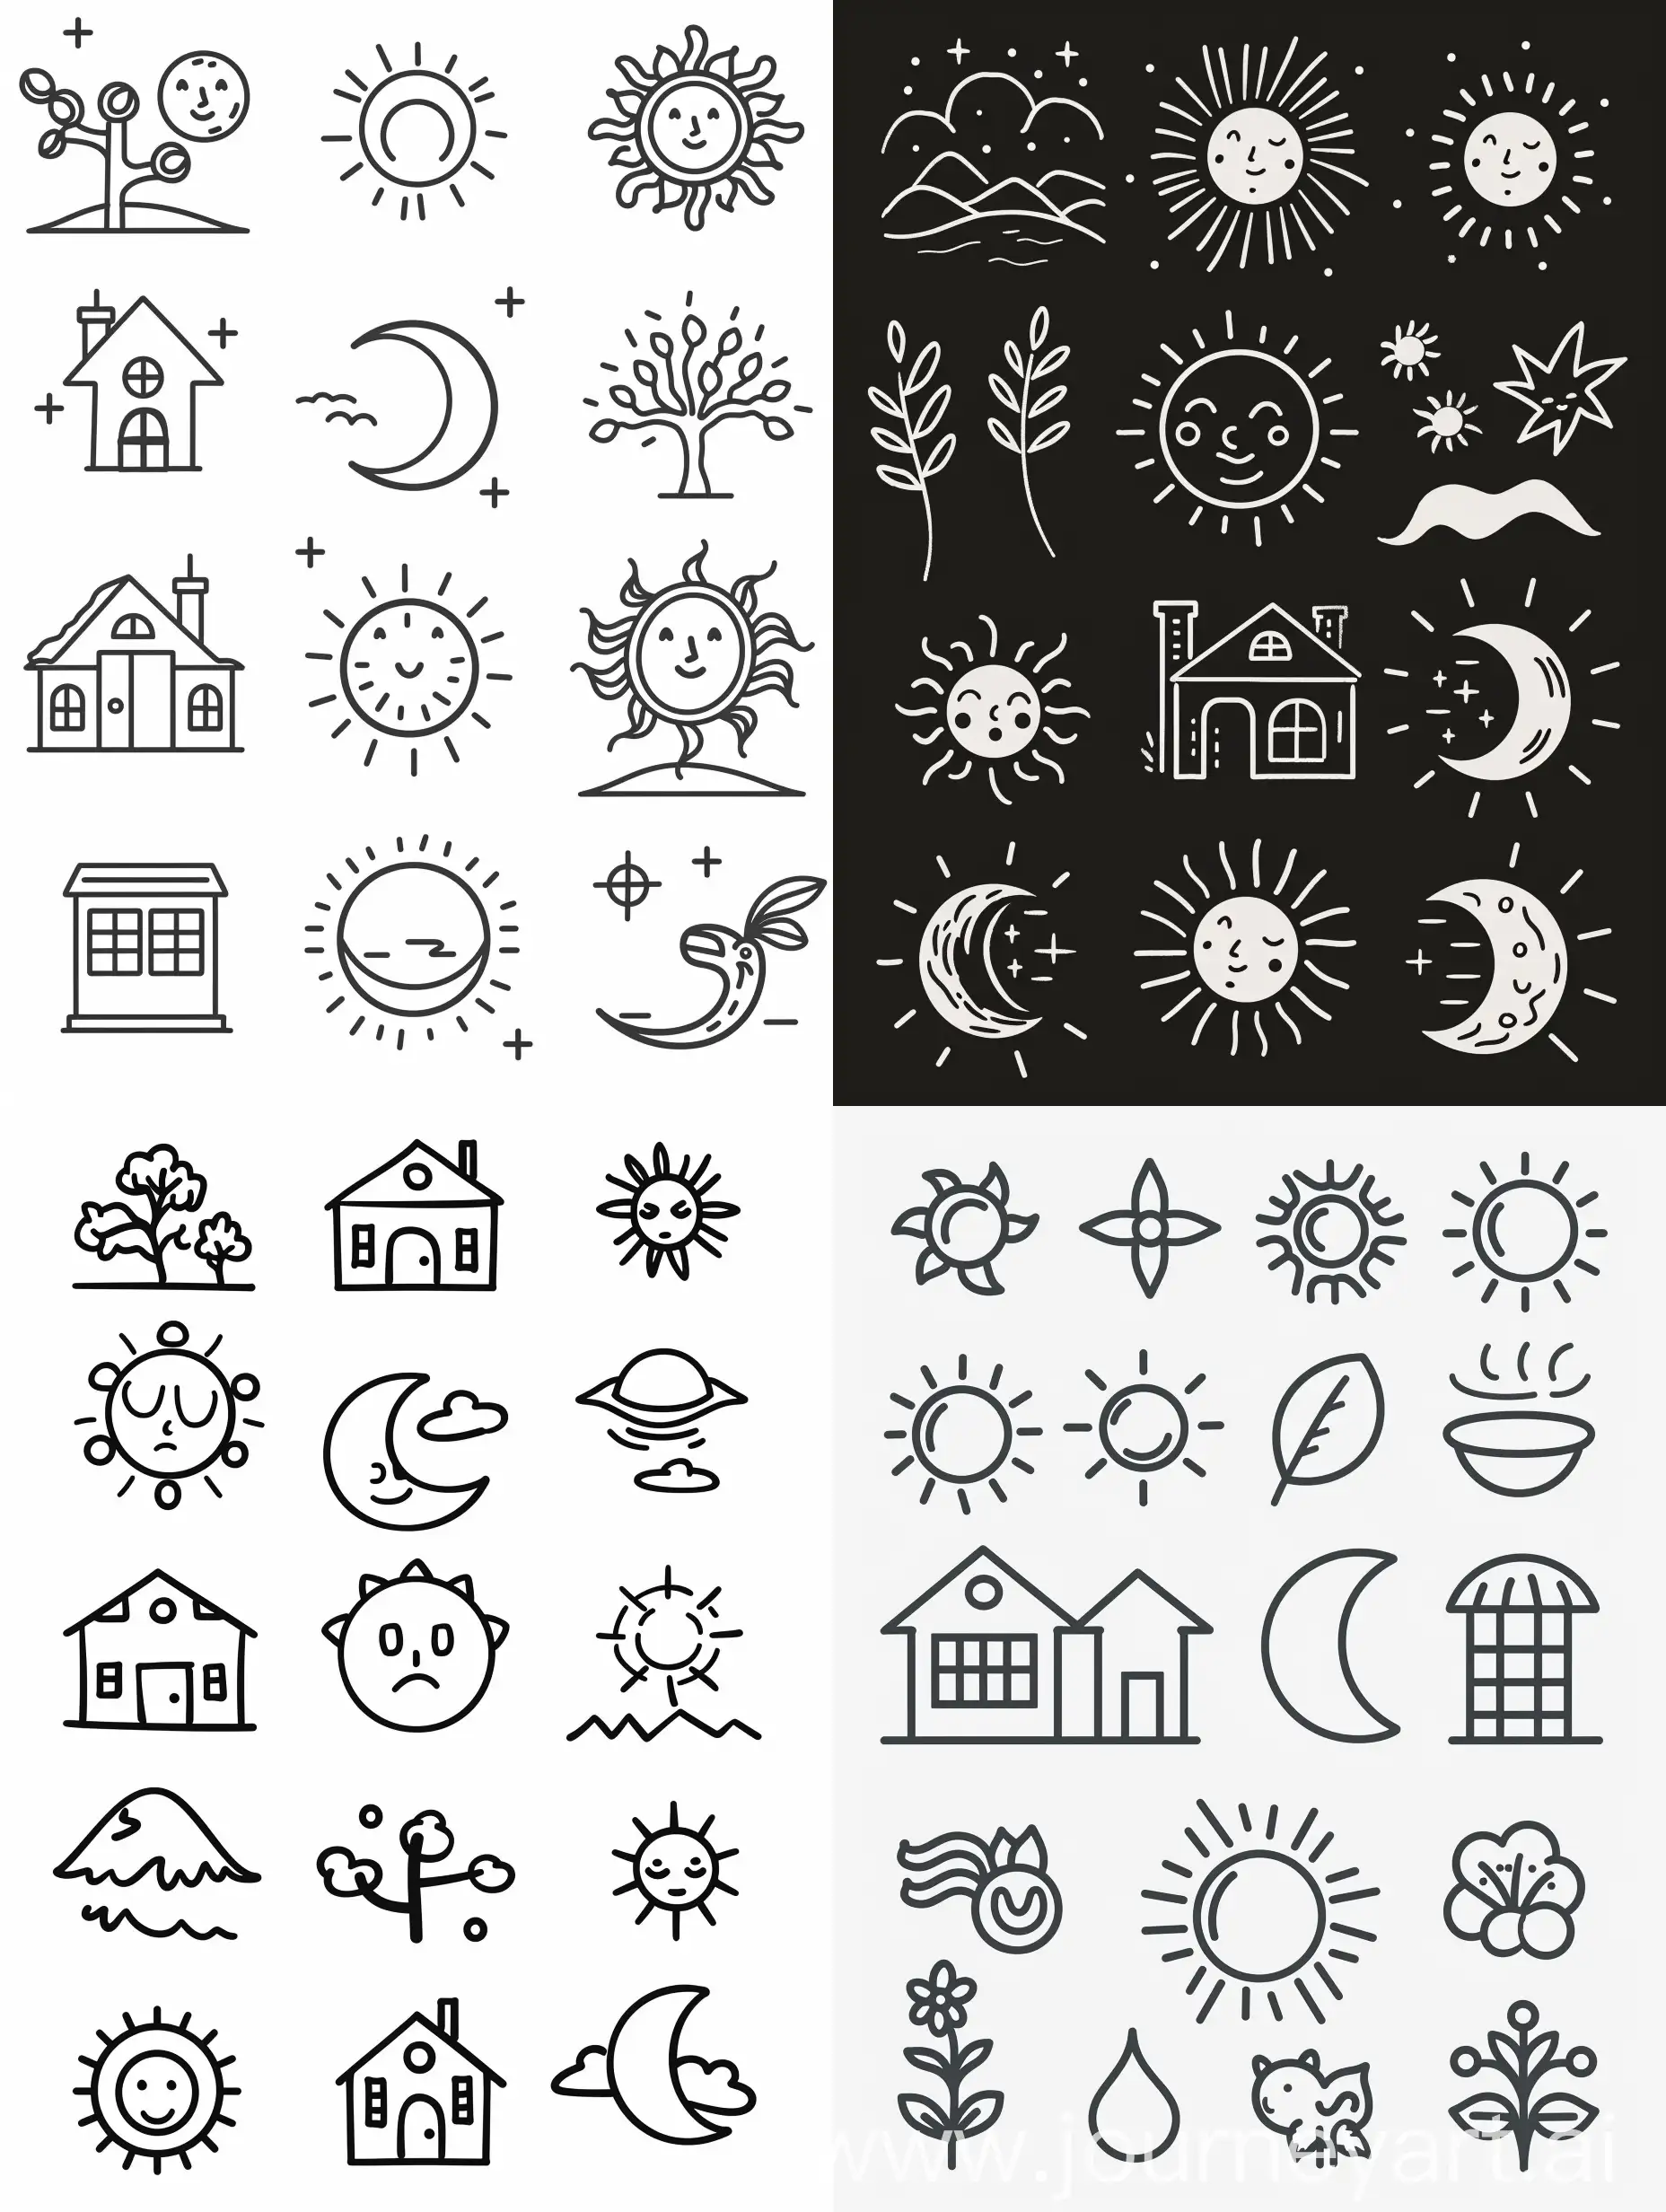 HandDrawn-Nature-Icons-Cozy-Home-with-Sun-and-Moon